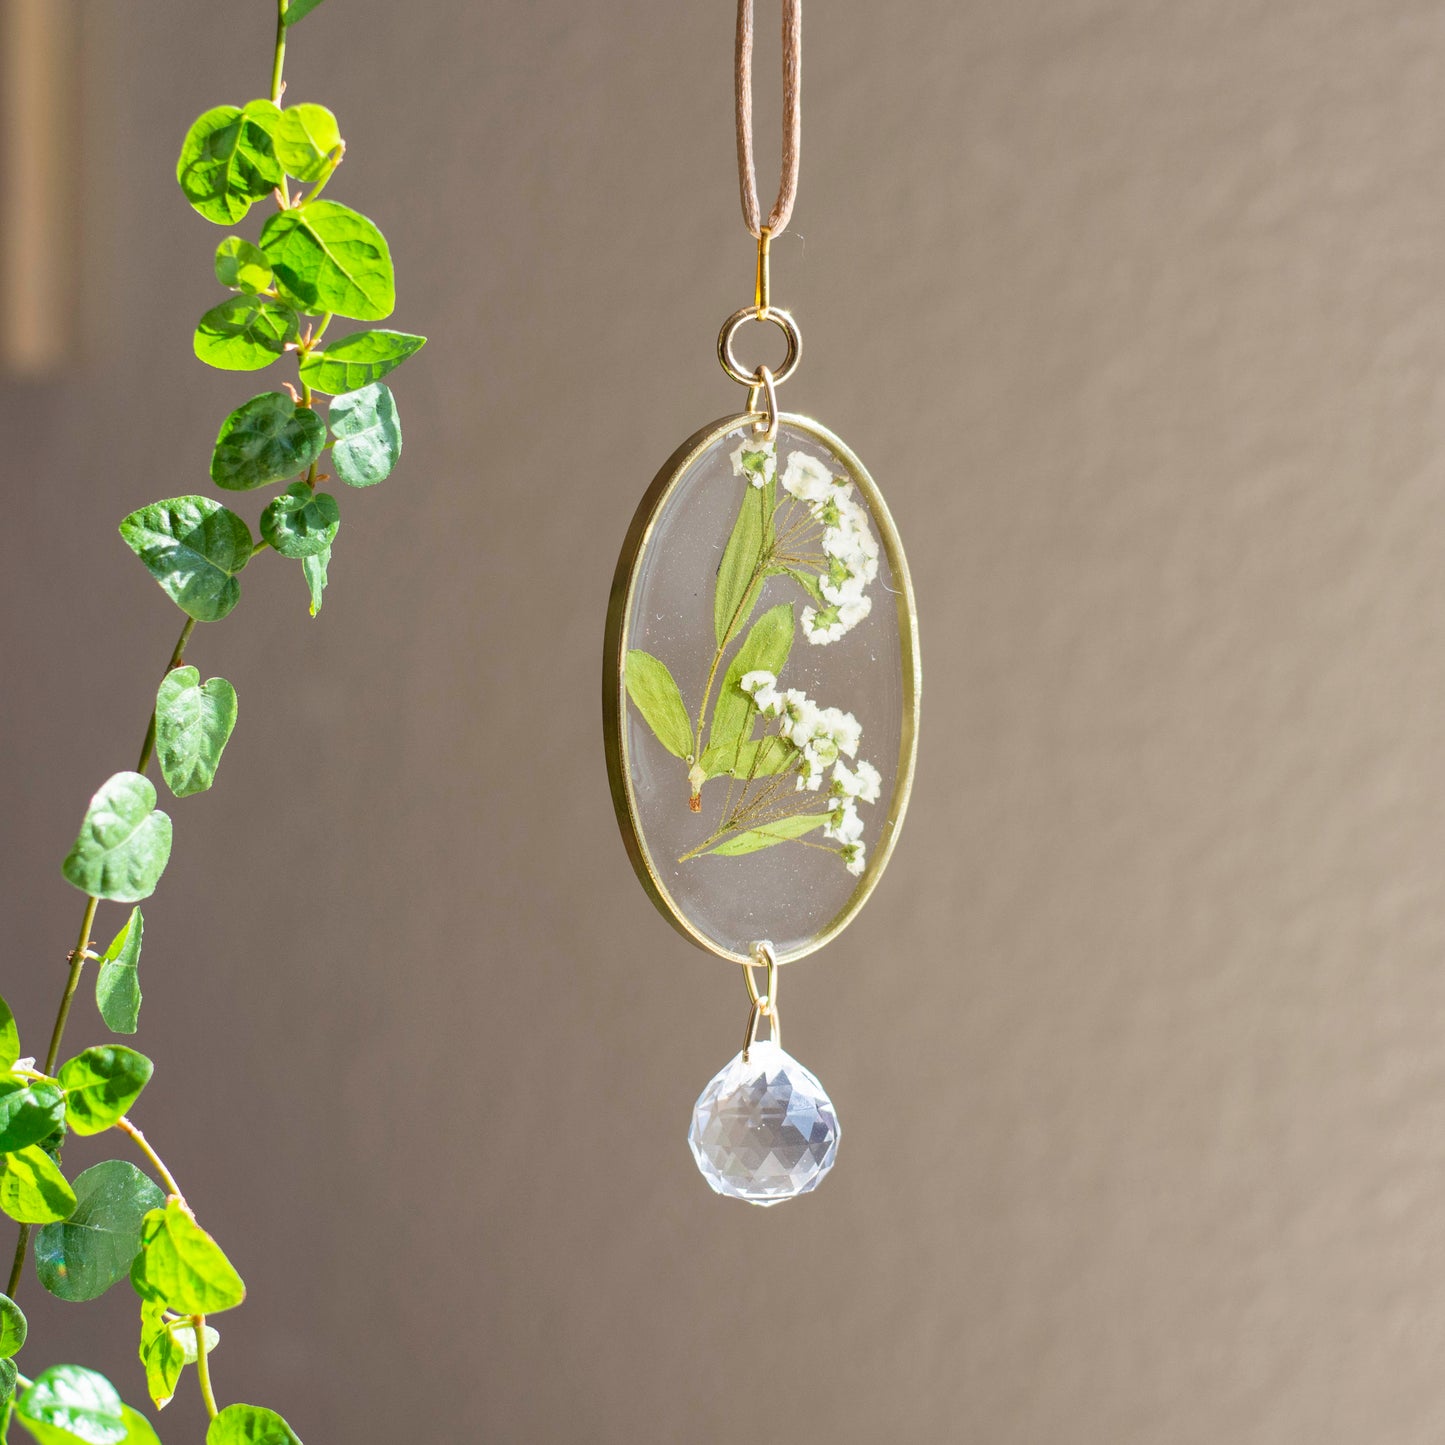 Sun Catcher - 3" Baby's Breath with Prism Bead